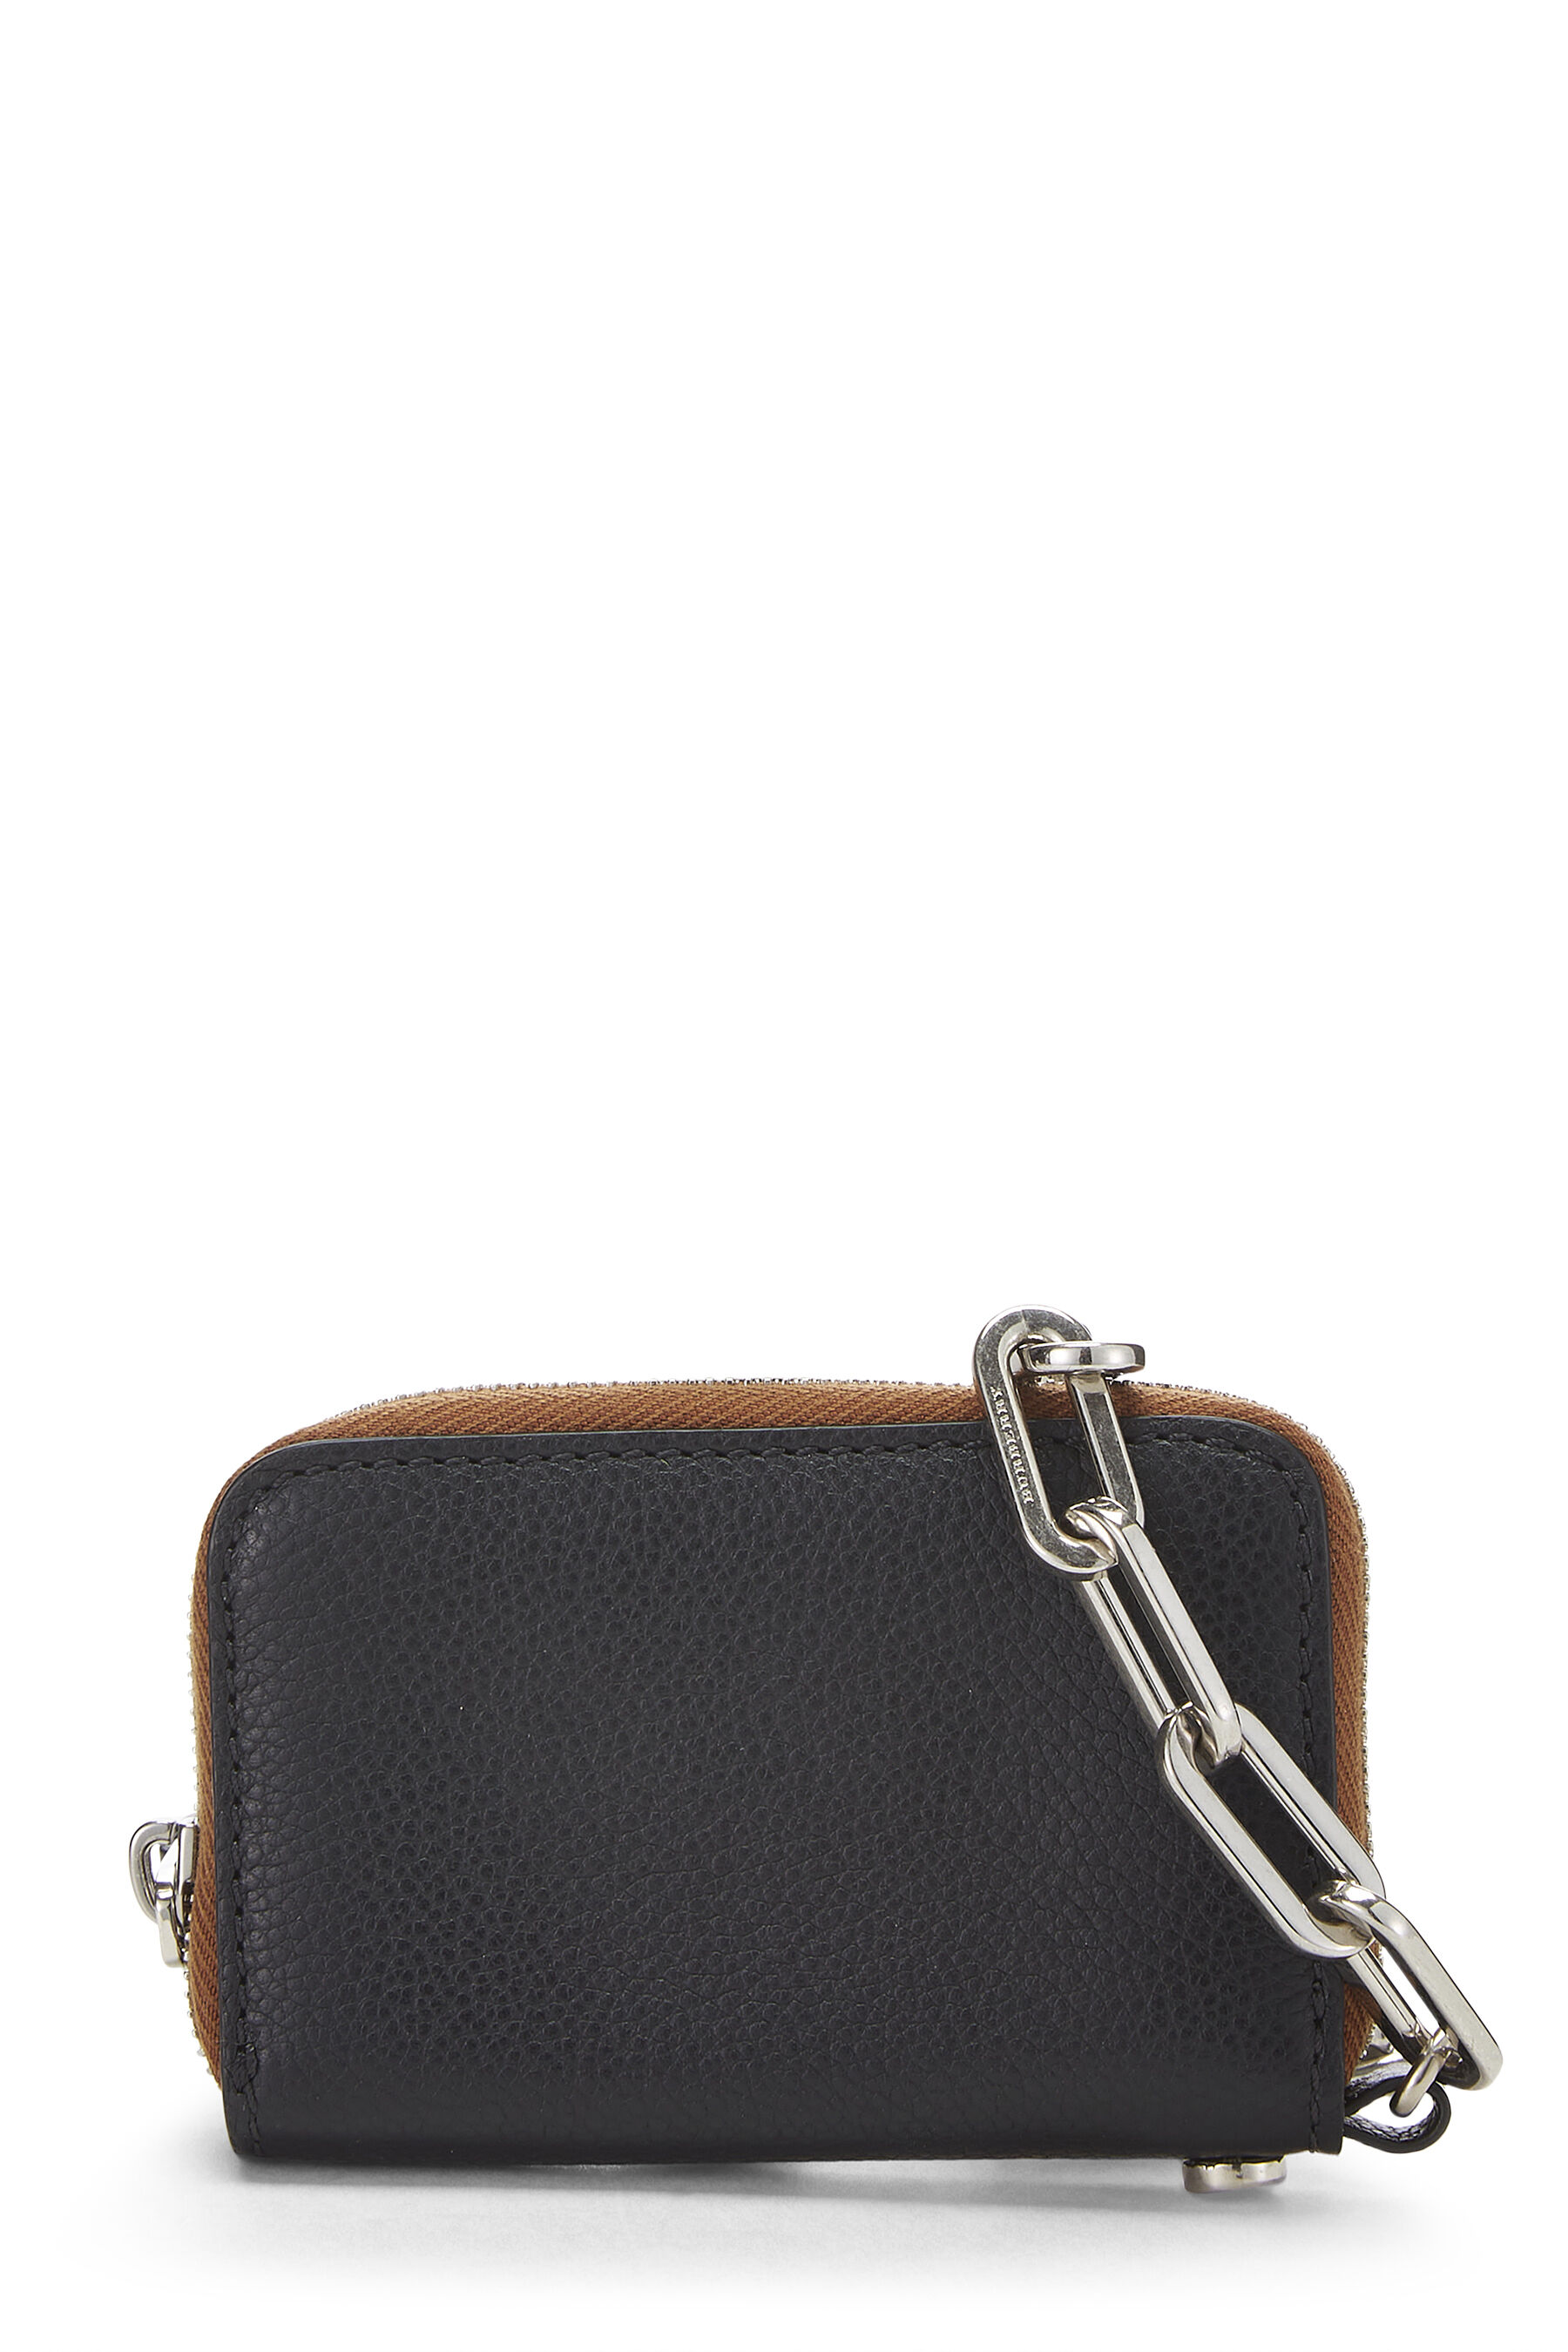 Black Leather Toby Chain Zip Coin Case